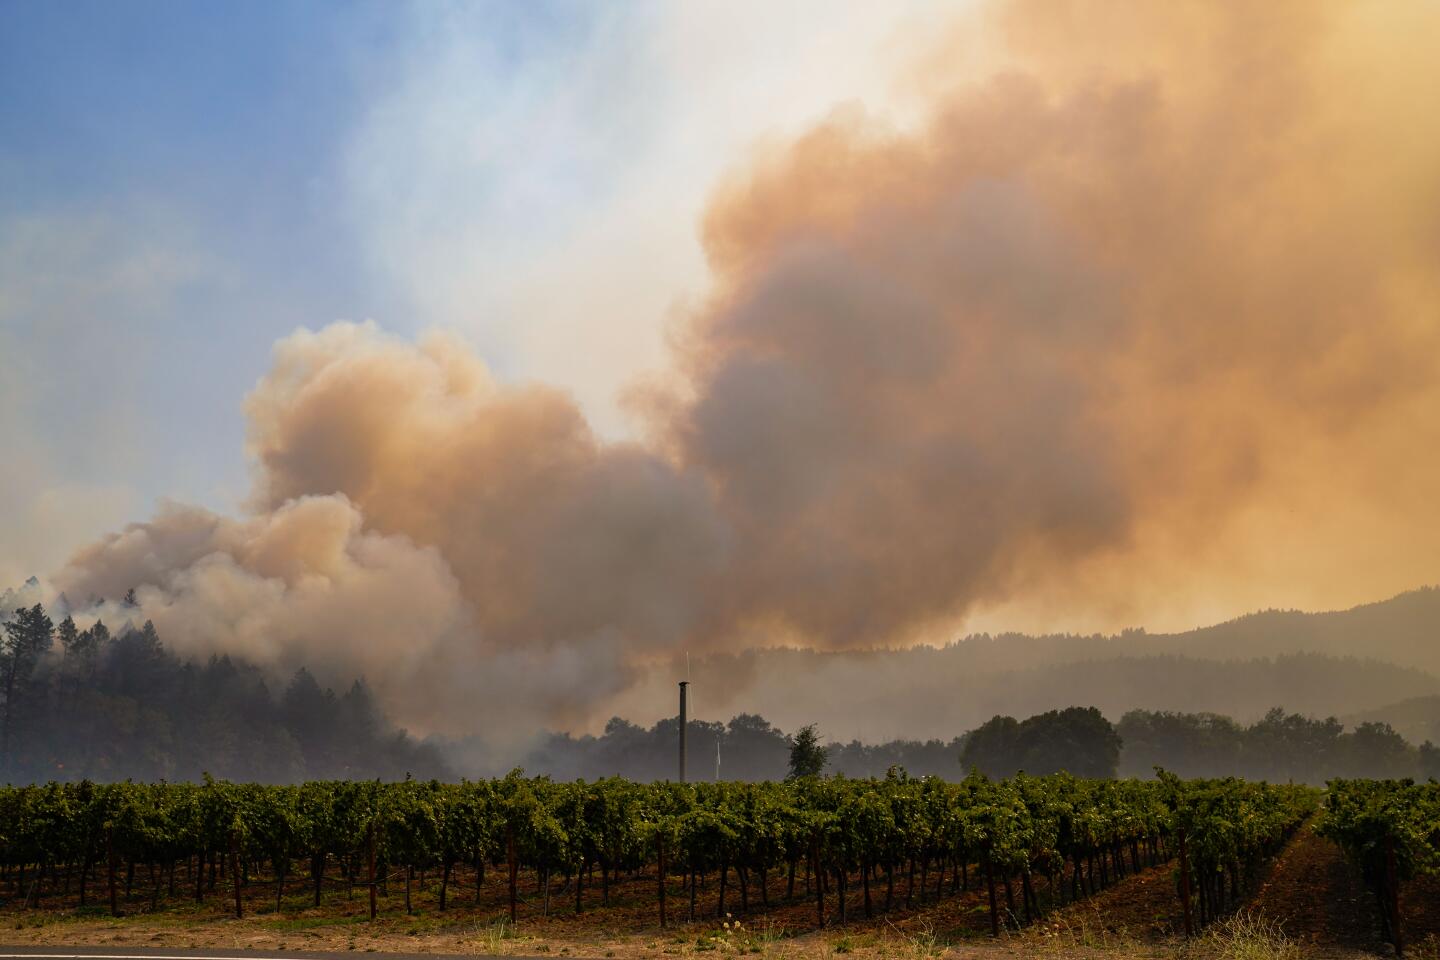 Billowing smoke obscures trees behind a vineyard.